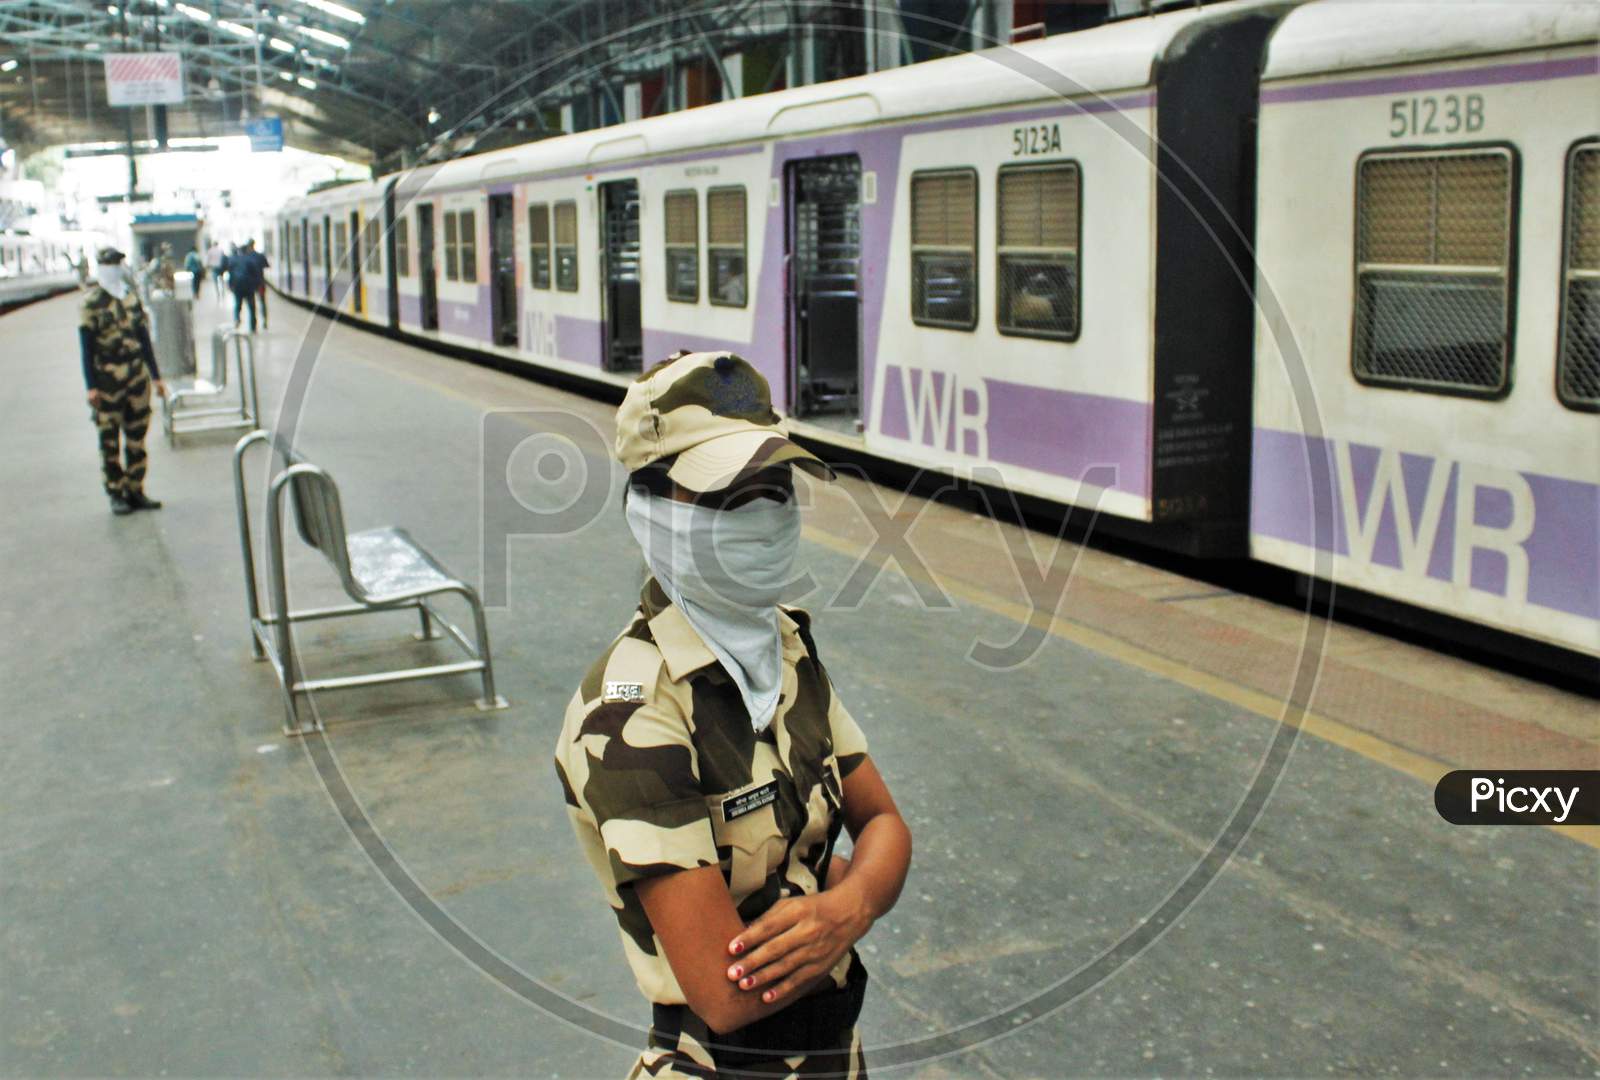 CPRF is deployed at Churchgate station, after the government eased a nationwide lockdown imposed as a preventative measure against the COVID-19  coronavirus, in Mumbai, India on June 16, 2020.